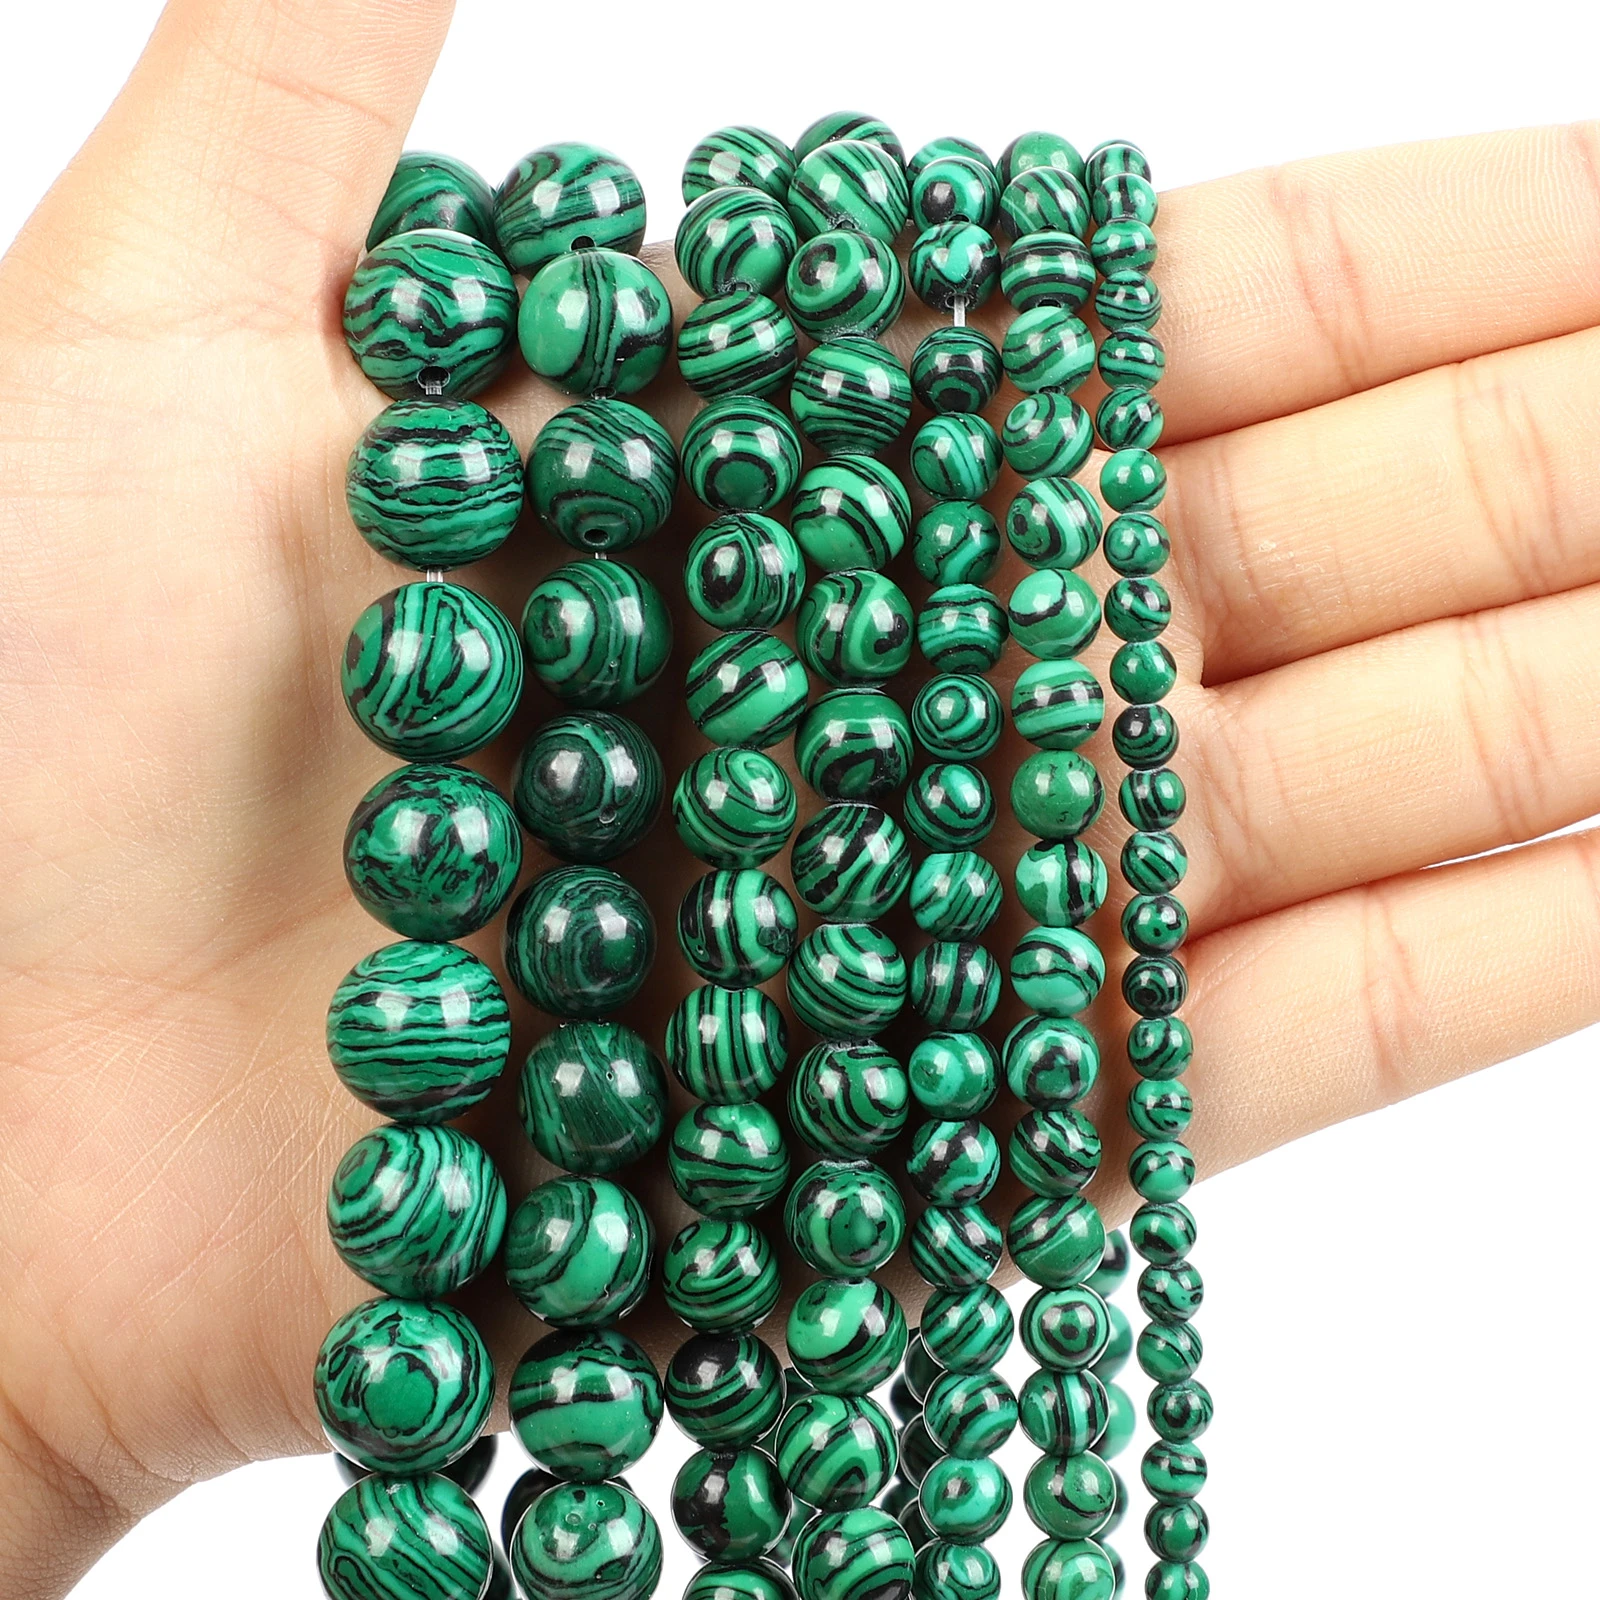 beaded necklace Natural Stone Beads Green Malachite Charm Round Loose Beads For Jewelry Making Needlework Bracelet Diy Strand 4/6/8/10/12MM beaded